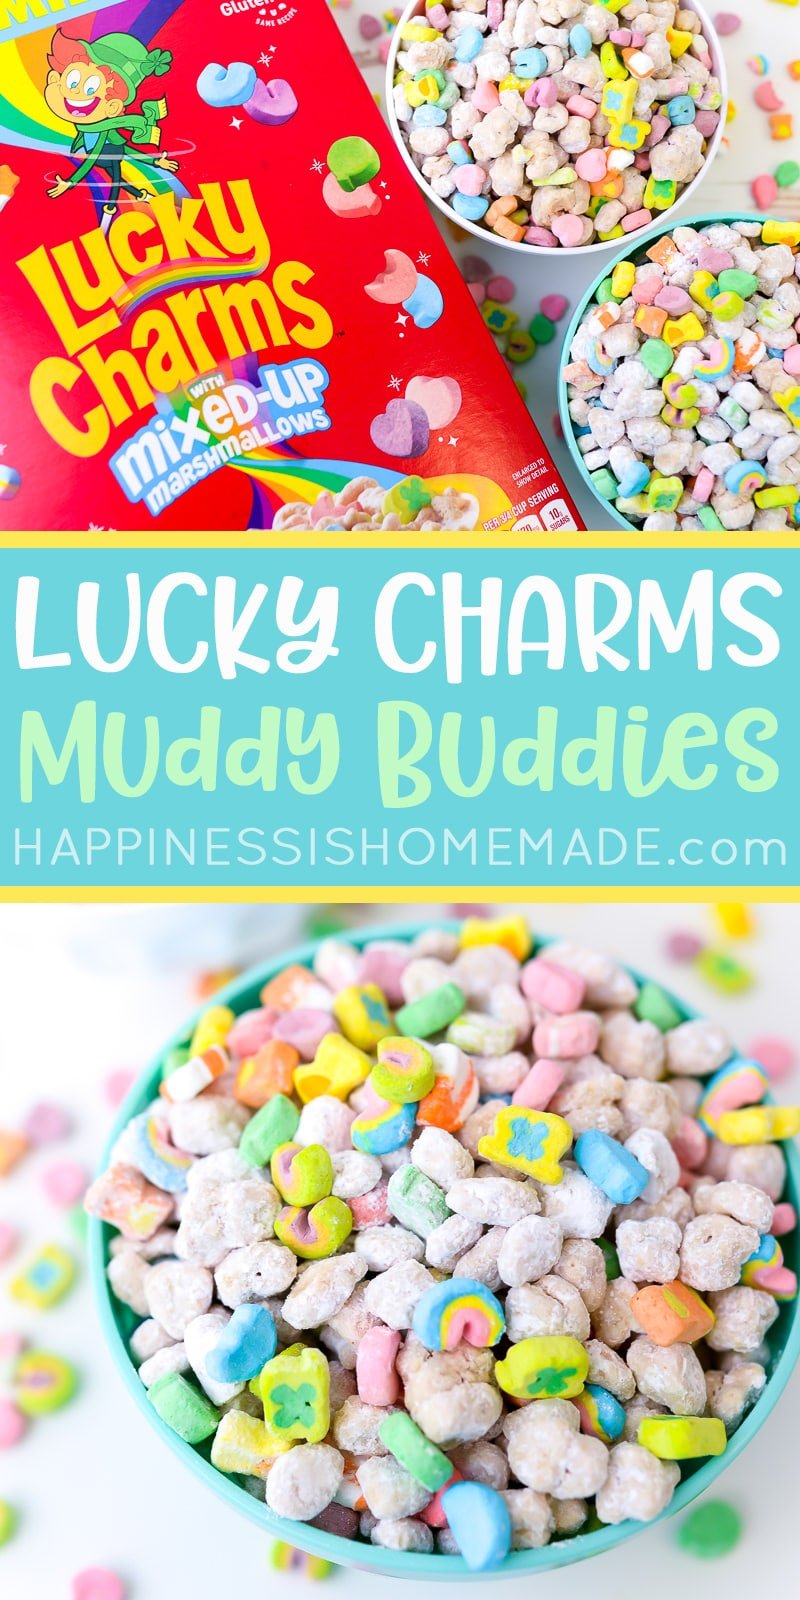 Lucky Charms Muddy Buddies Mix with Colorful Rainbow Marshmallows